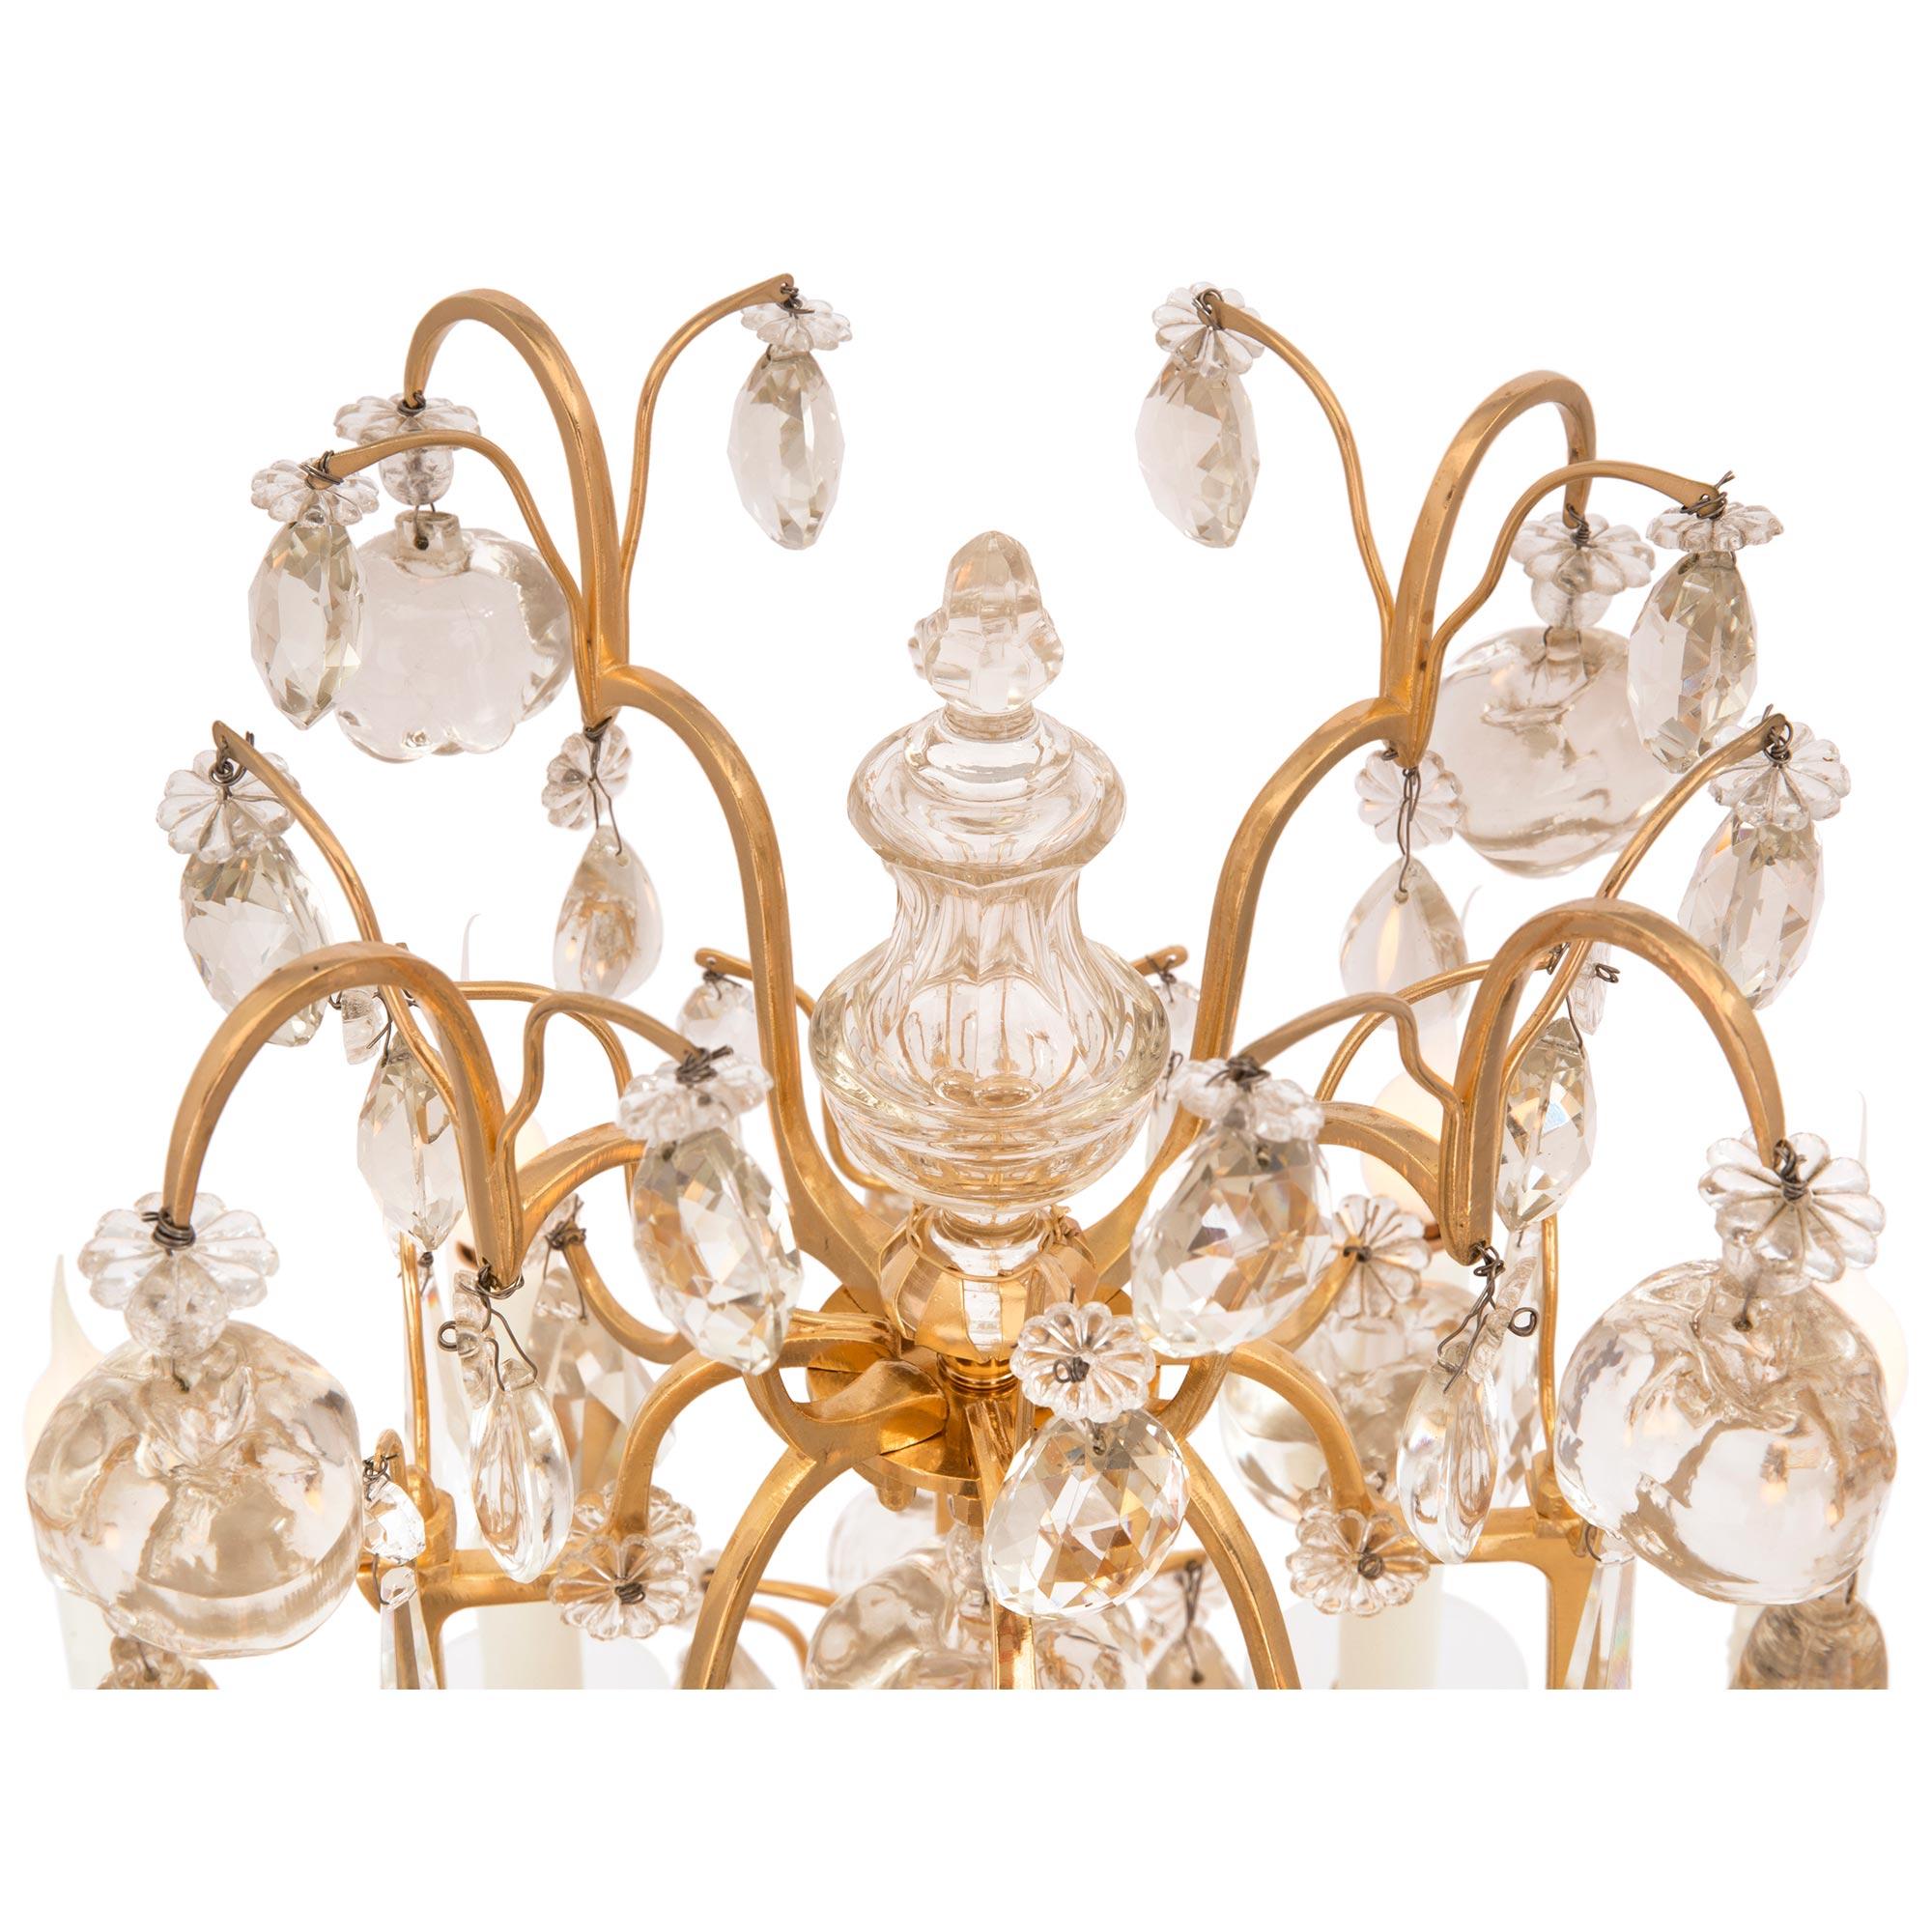 Pair of French 19th Century Louis XVI St. Belle Époque Period Girandole Lamps In Good Condition For Sale In West Palm Beach, FL